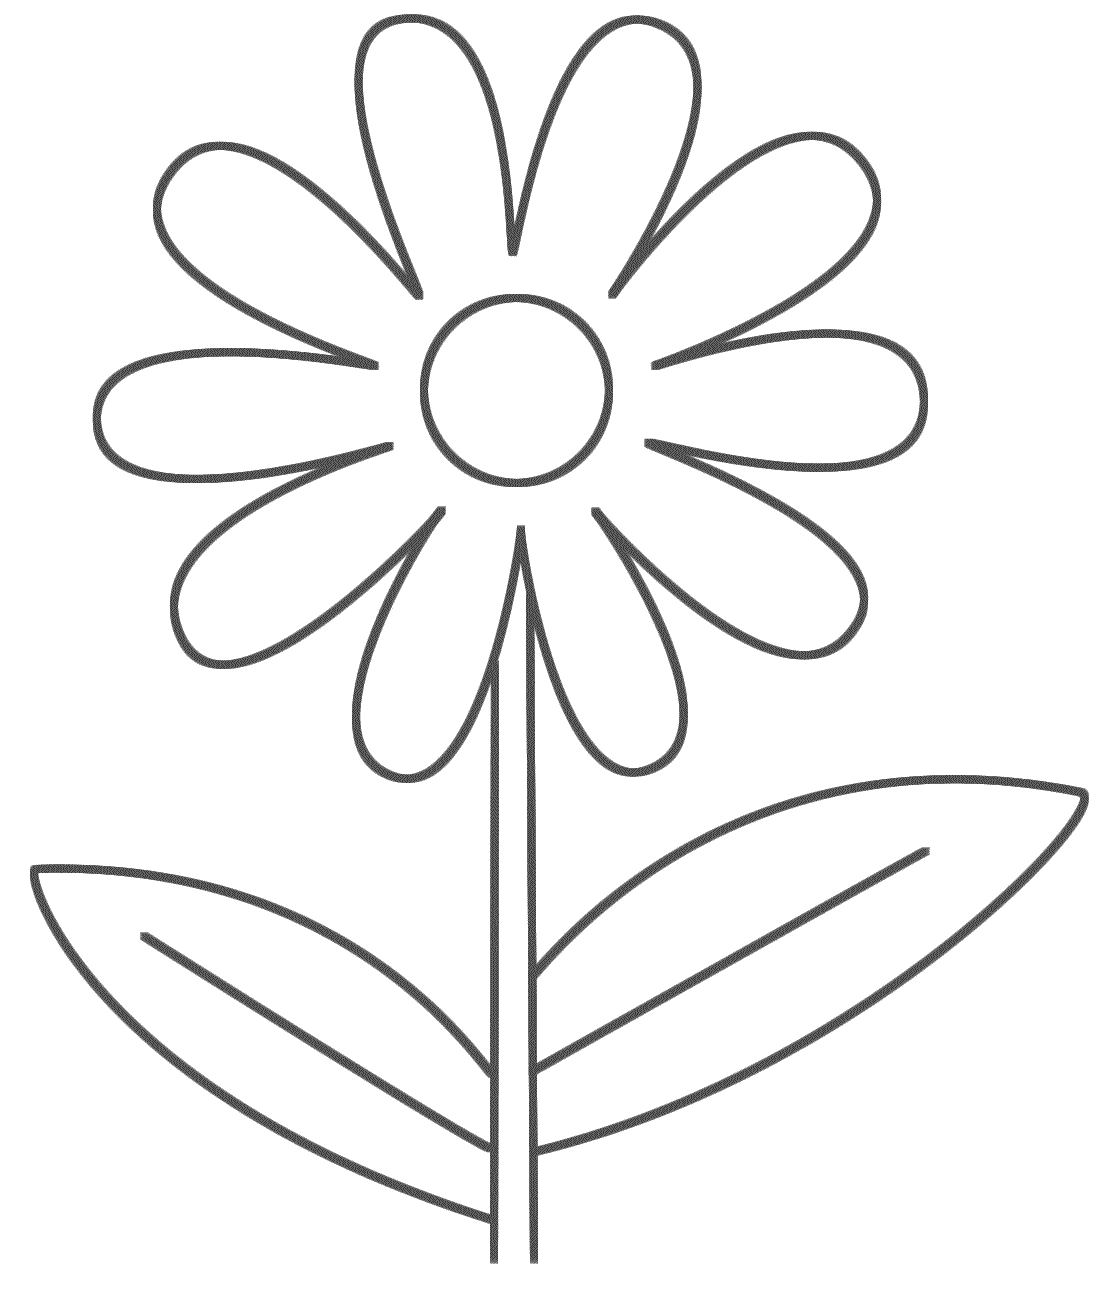 Lotus Flower Coloring Pages Easy | Flower Coloring pages of ...